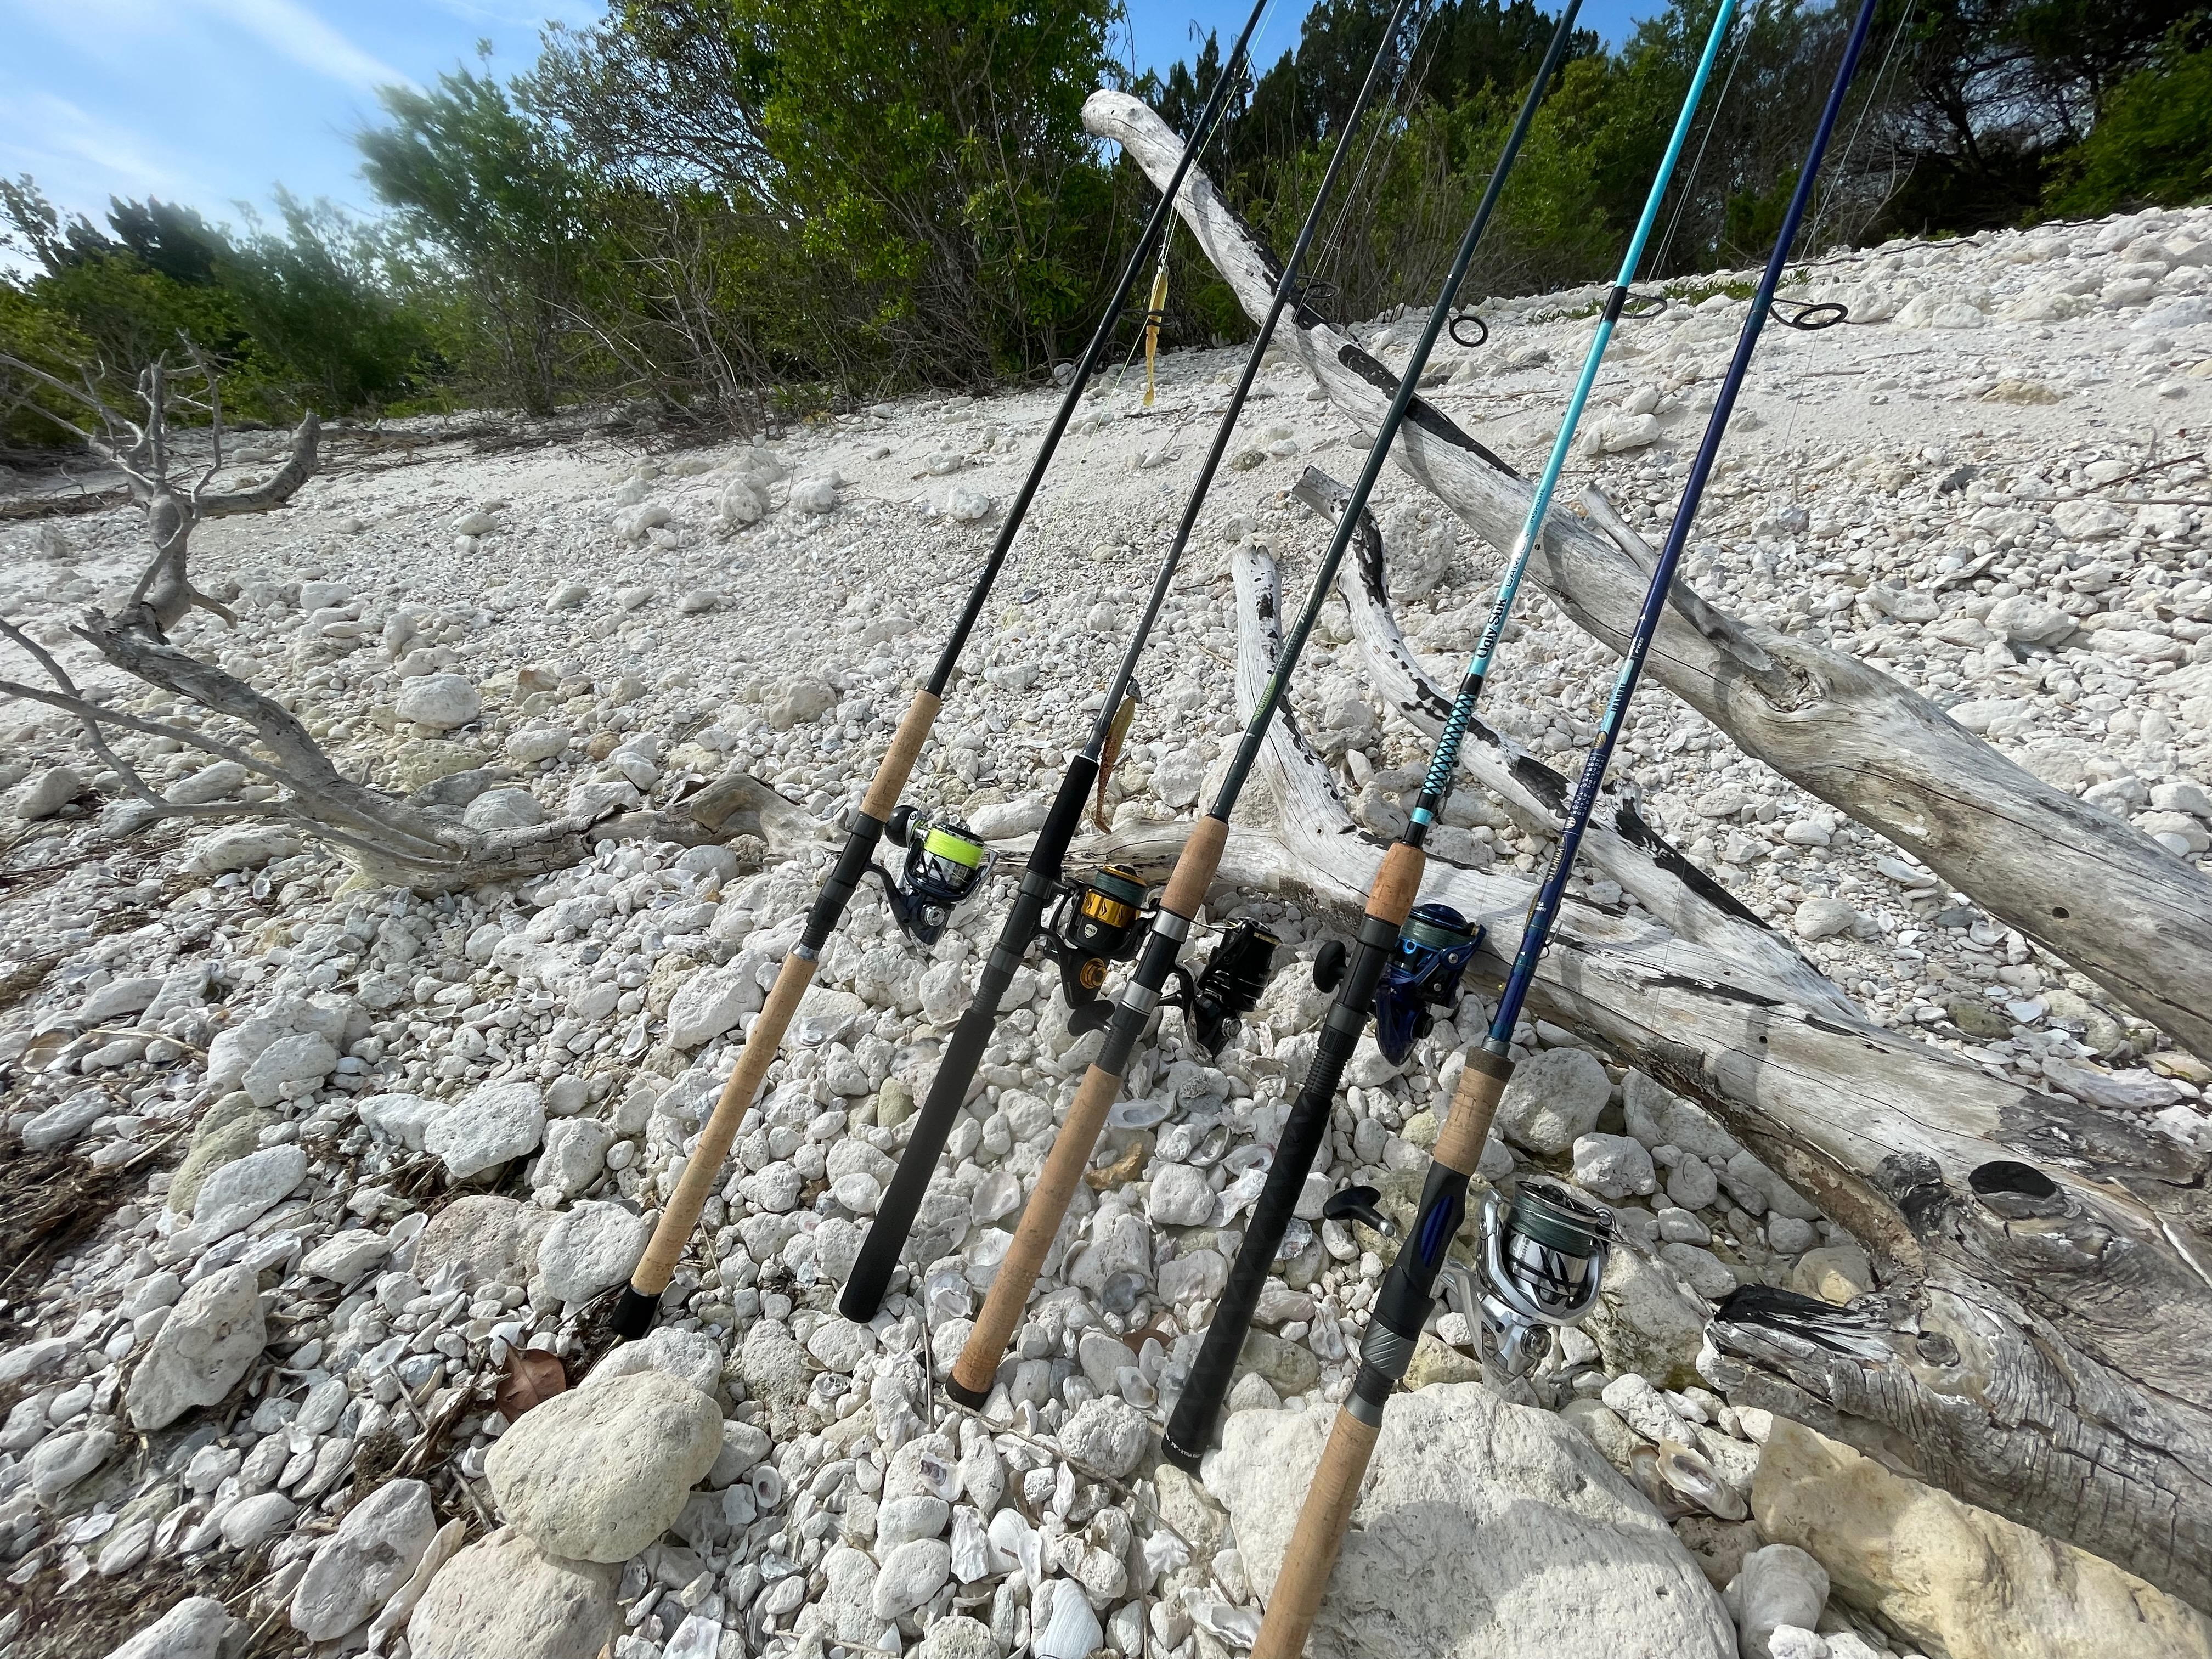 Offshore Angler Inshore Extreme Spinning Rod Review - OutdoorsNiagara